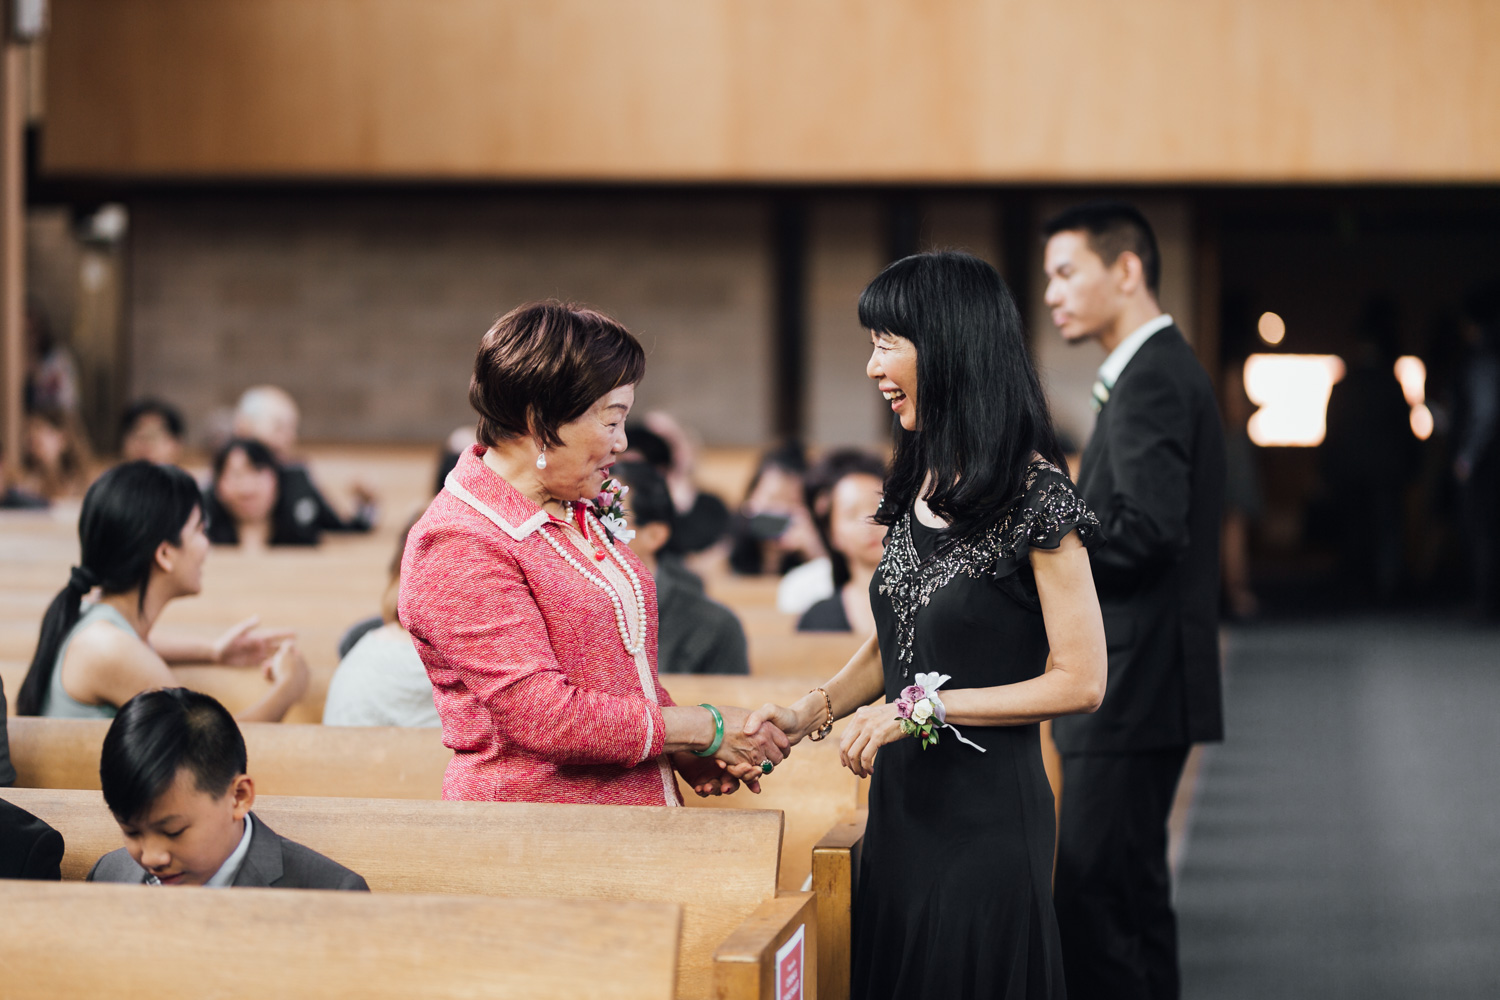 shaughnessy heights united church wedding ceremony vancouver photography